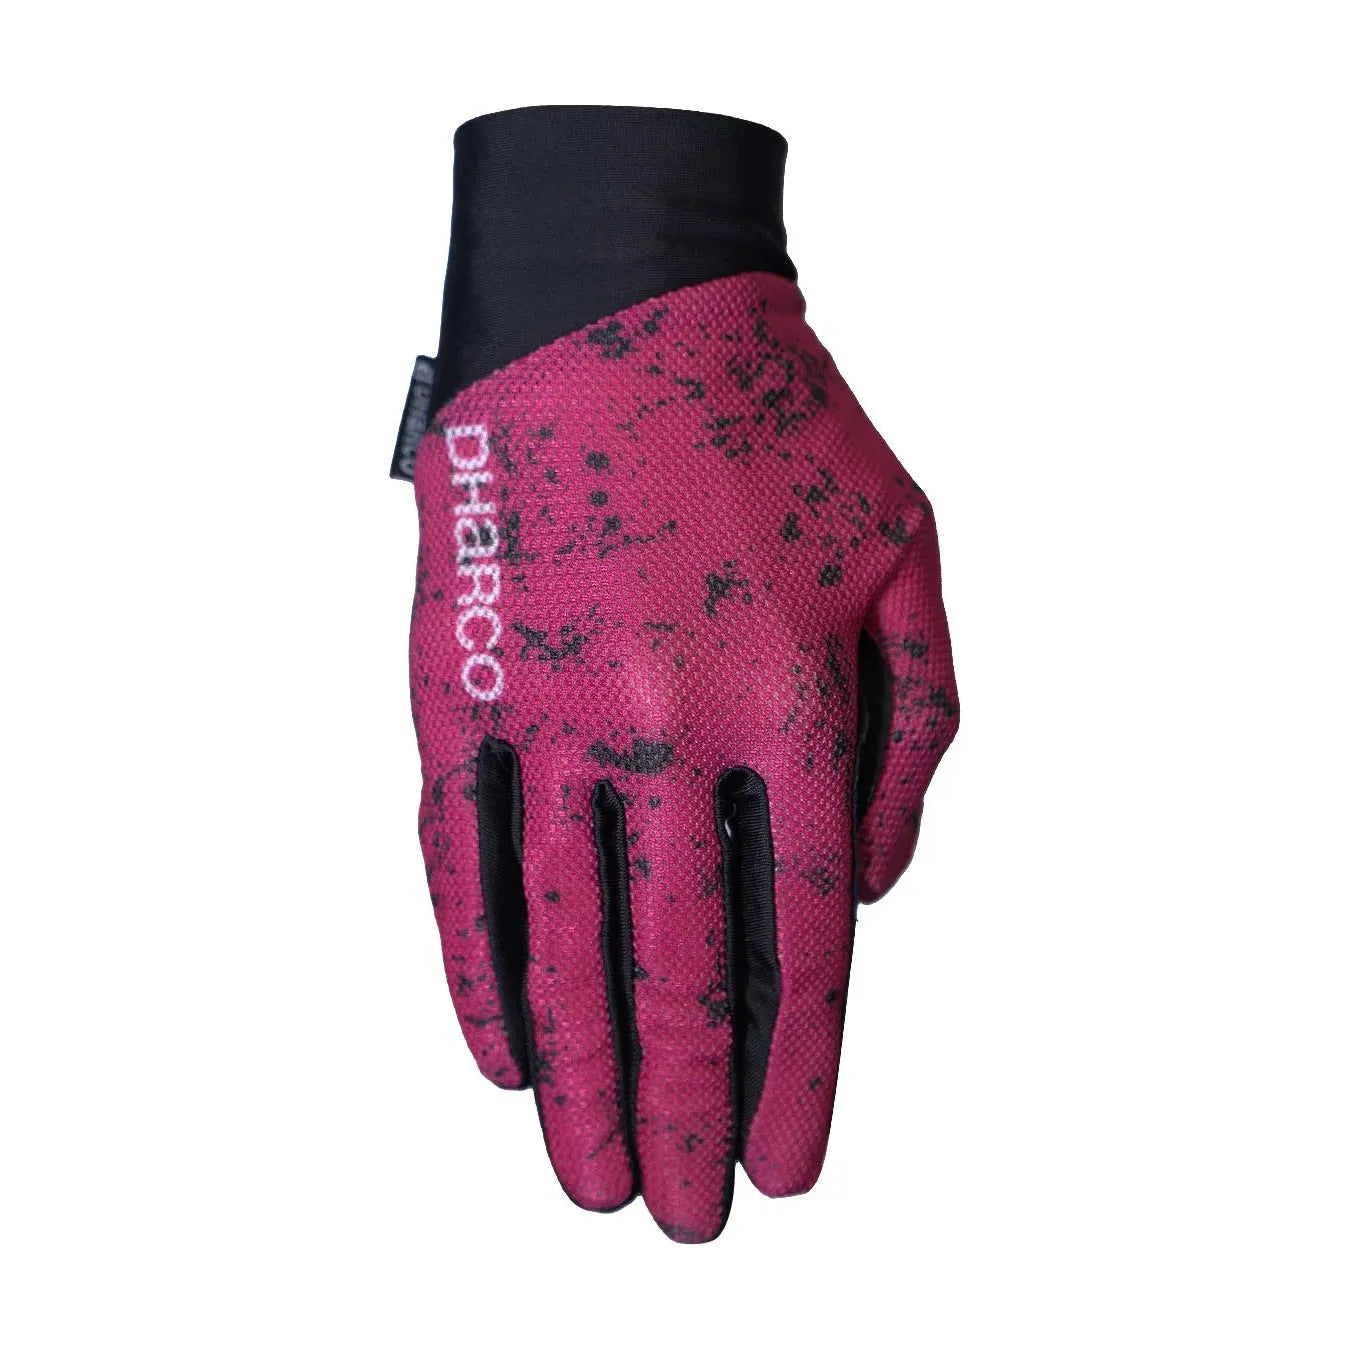 DHaRCO Women's Trail Gloves - L - Chili Peppers